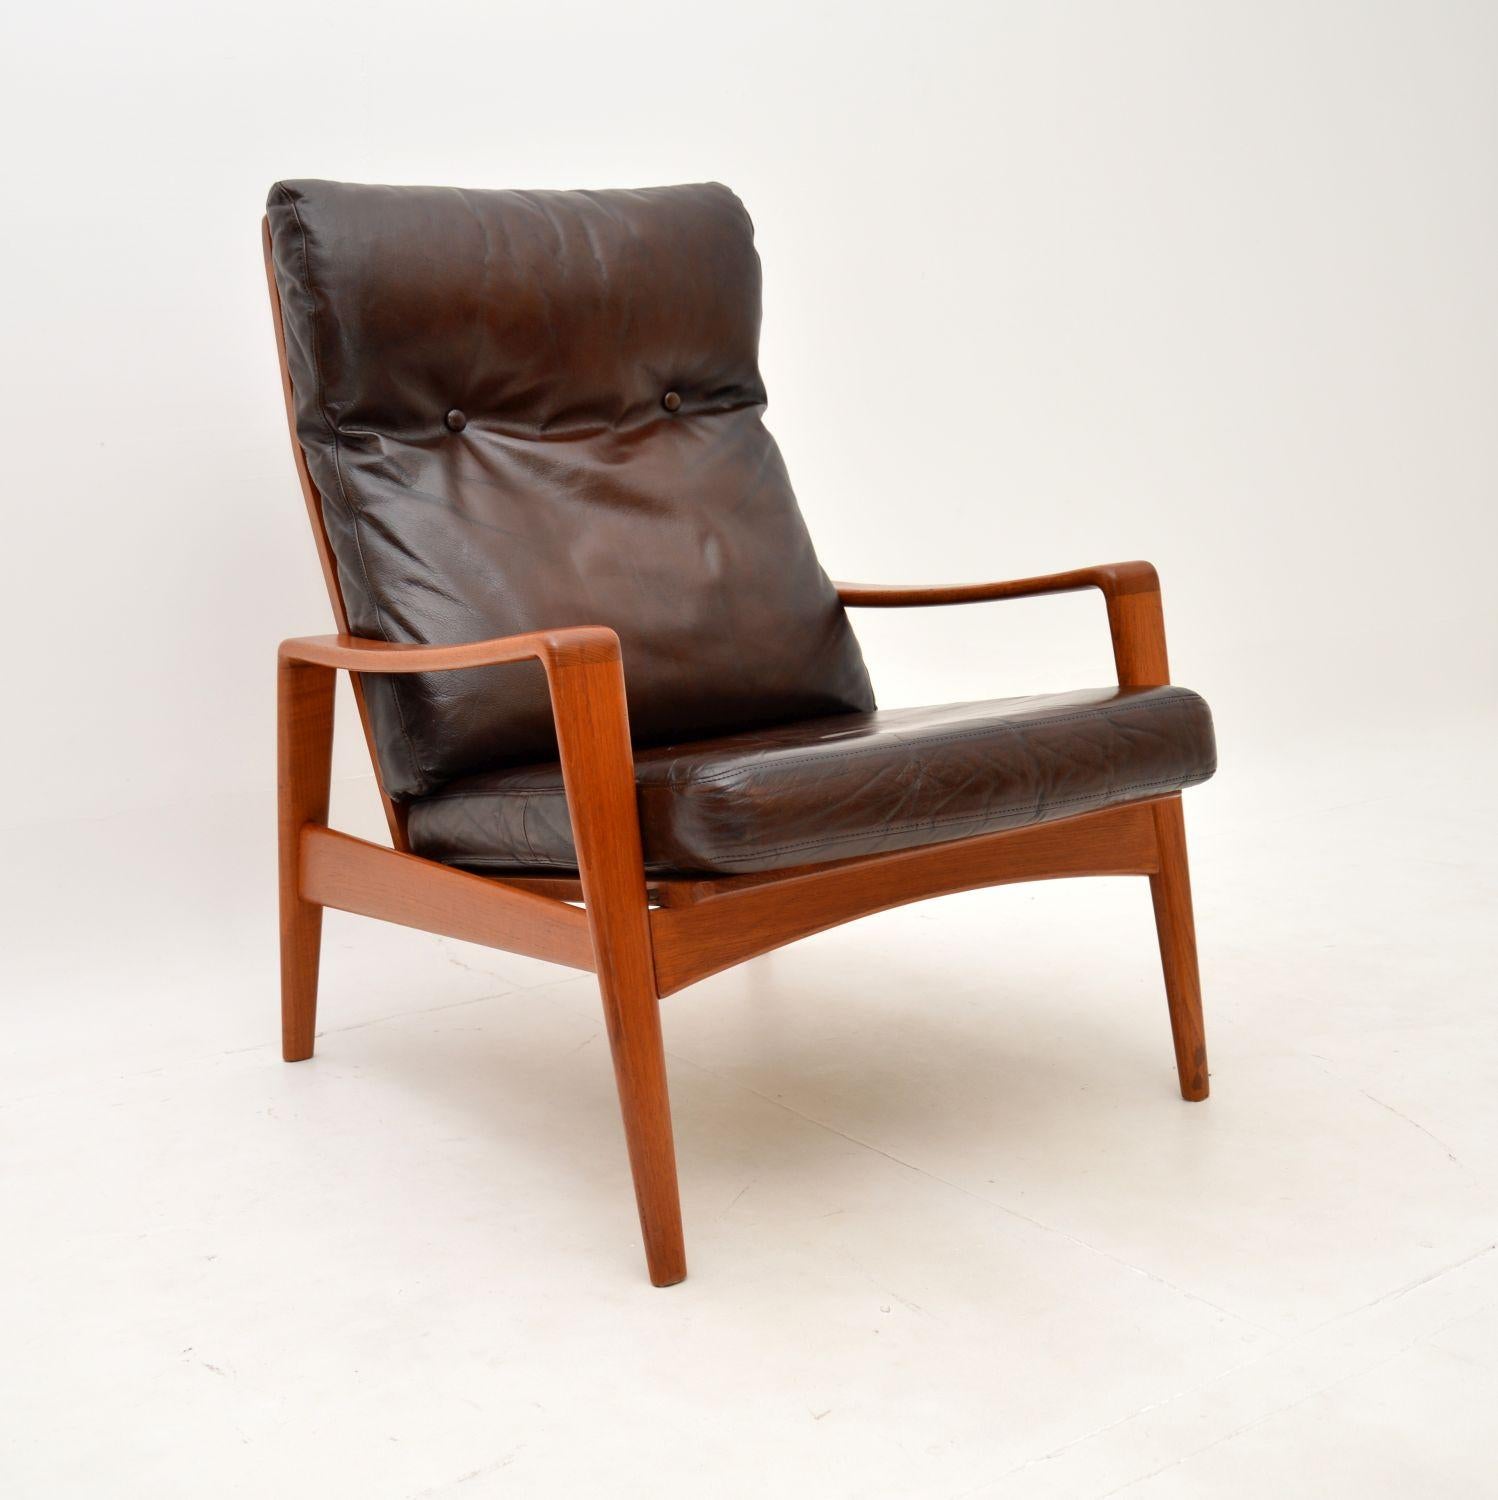 Pair of Danish Vintage Teak and Leather Armchairs by Arne Wahl Iversen For Sale 2